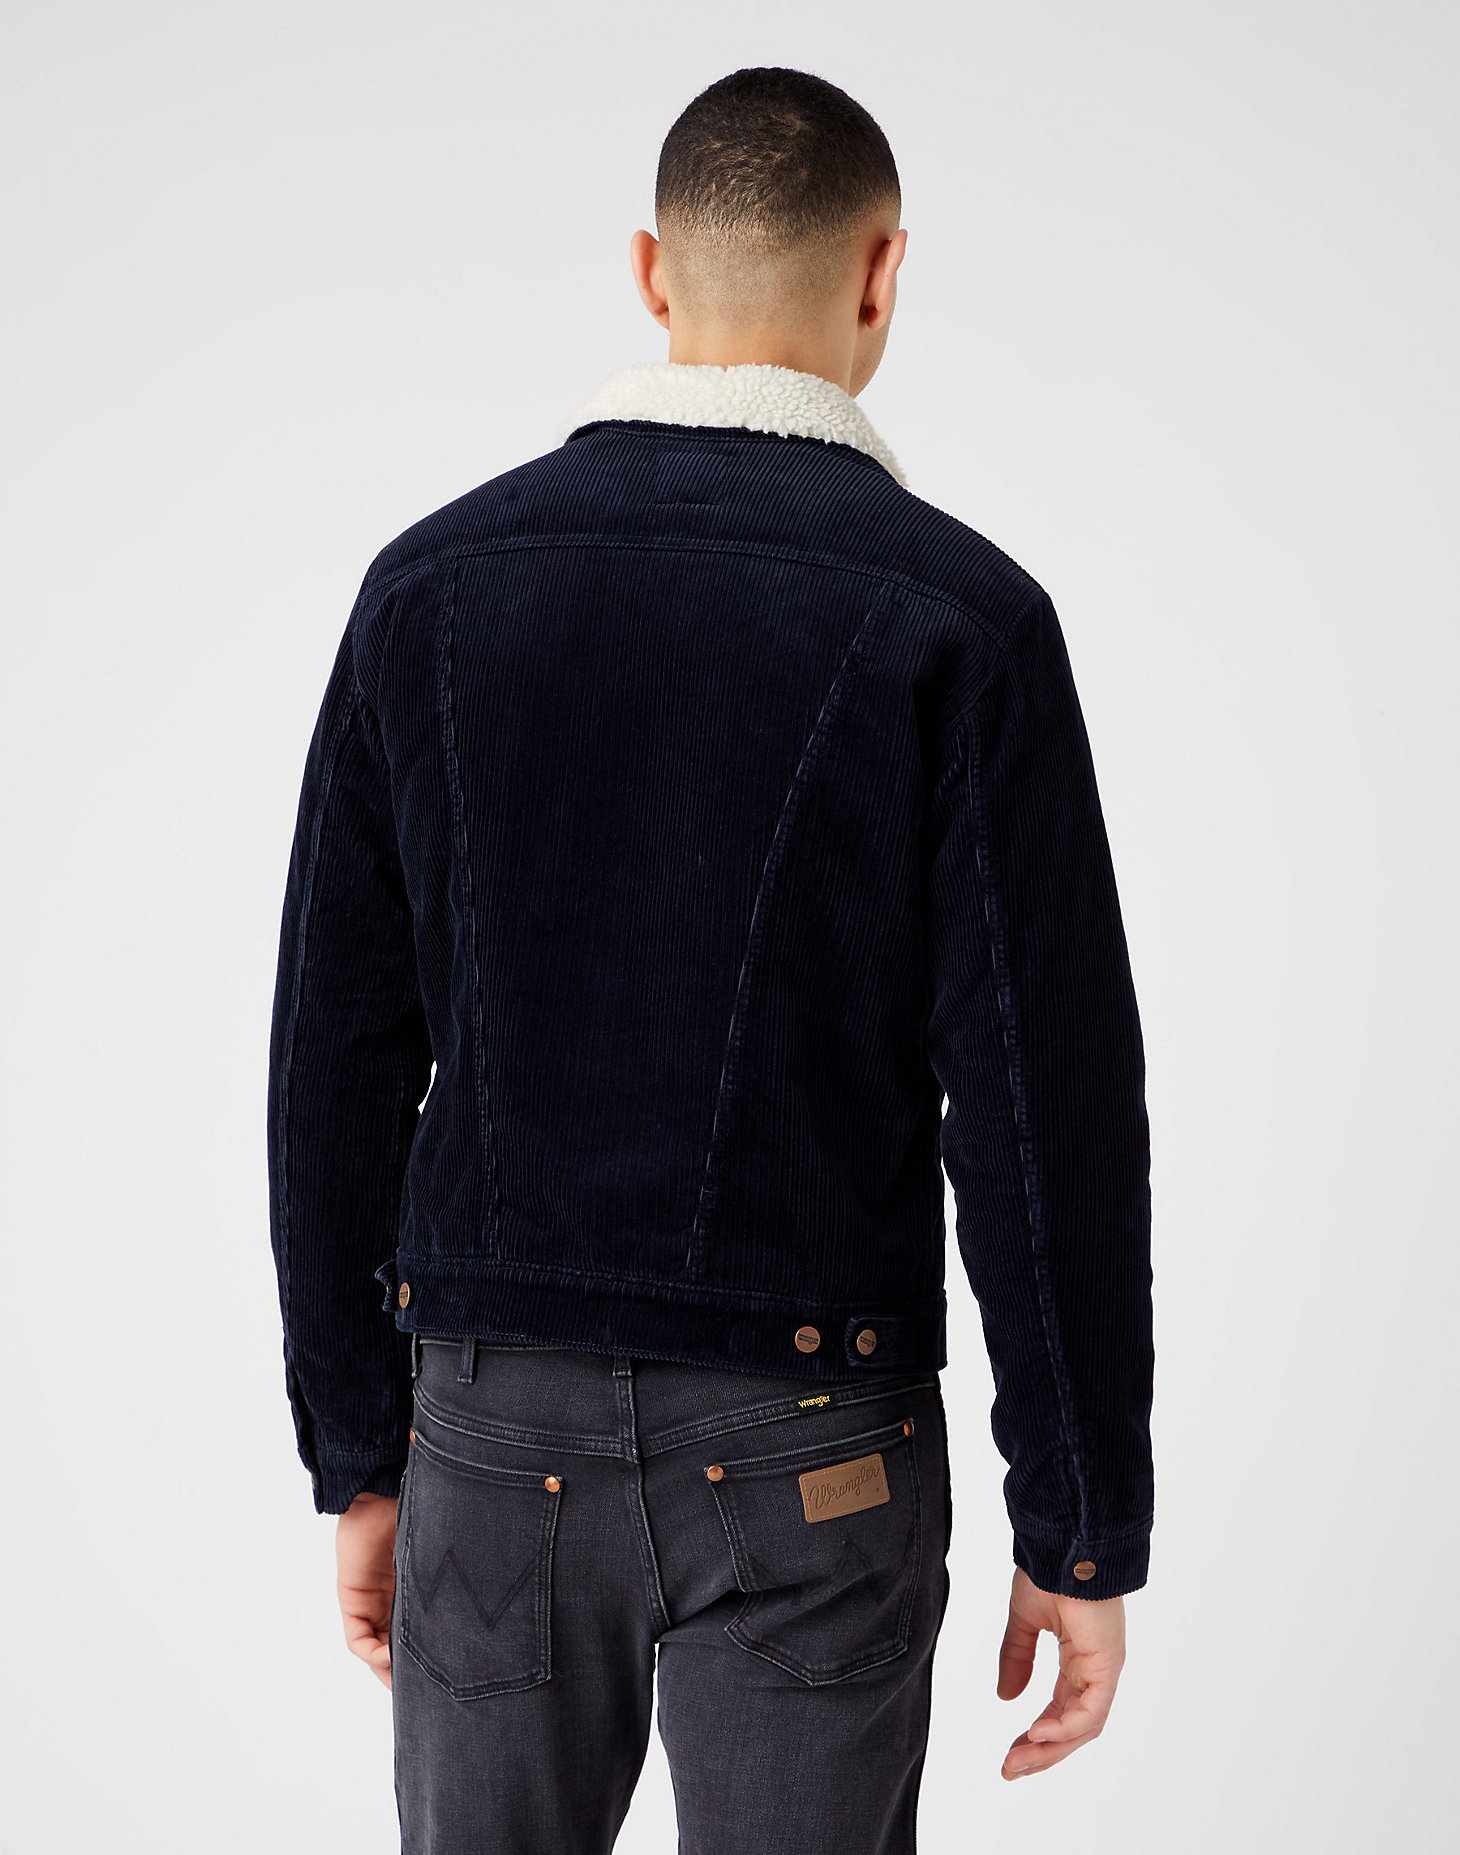 Icons 124MJ Sherpa in Navy alternative view 2